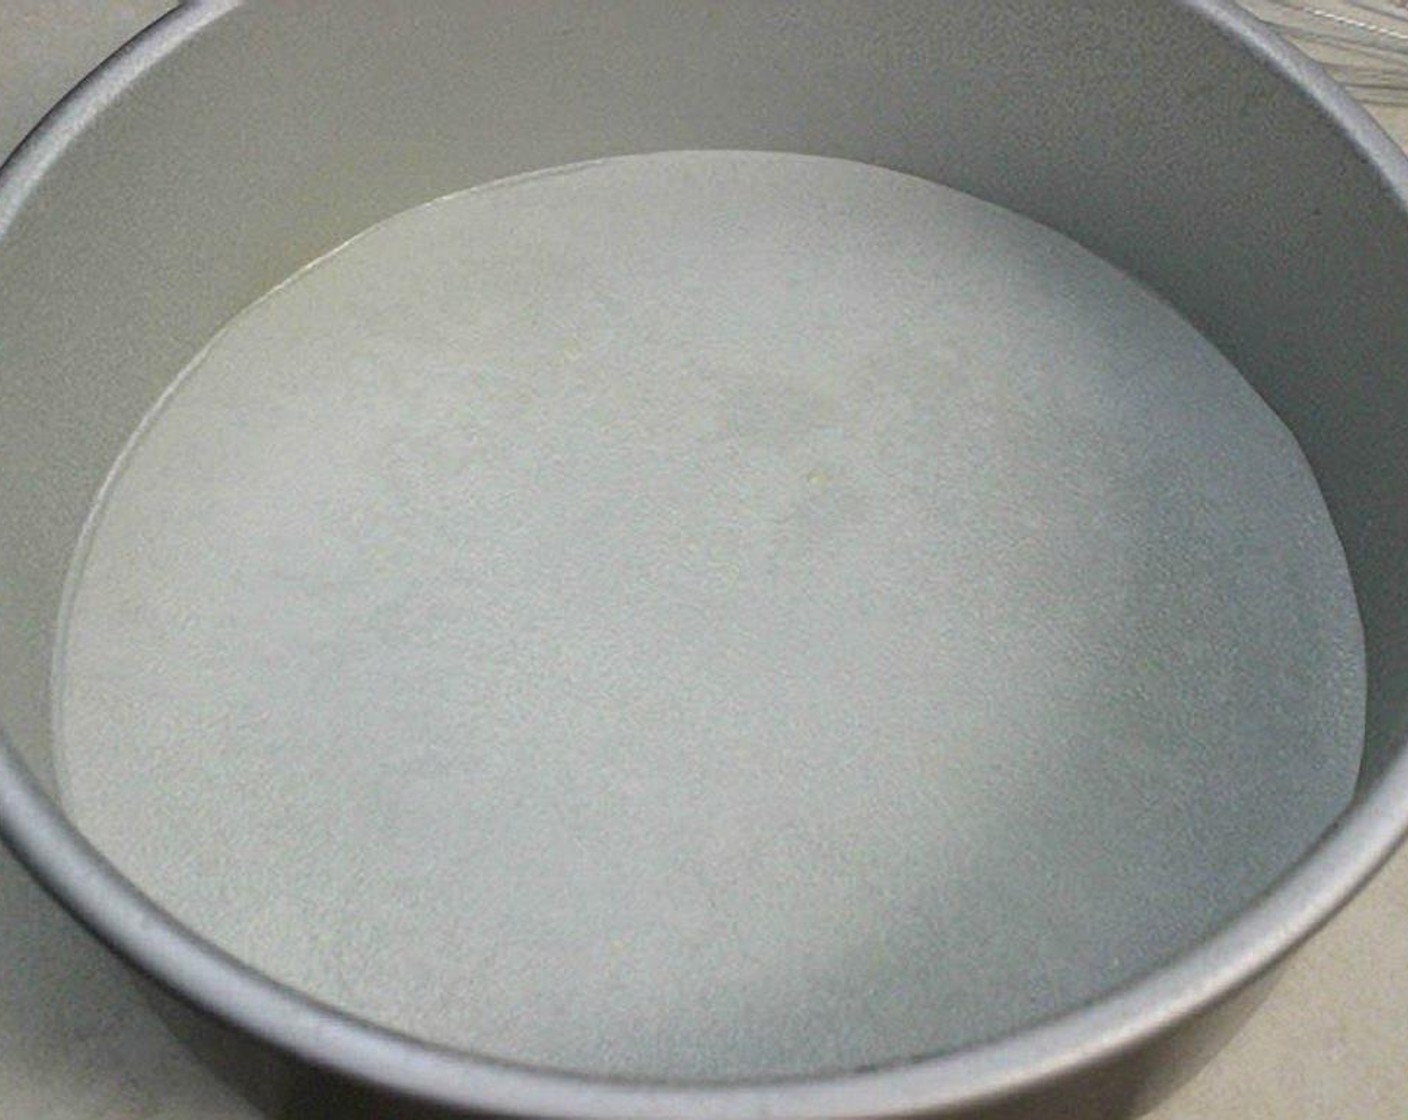 step 2 For the cake: Spray a 10 inch round cake pan with baking spray, or brush it with melted butter and then sprinkle with flour. Line the bottom of the pan with parchment paper and spray it with baking spray too.